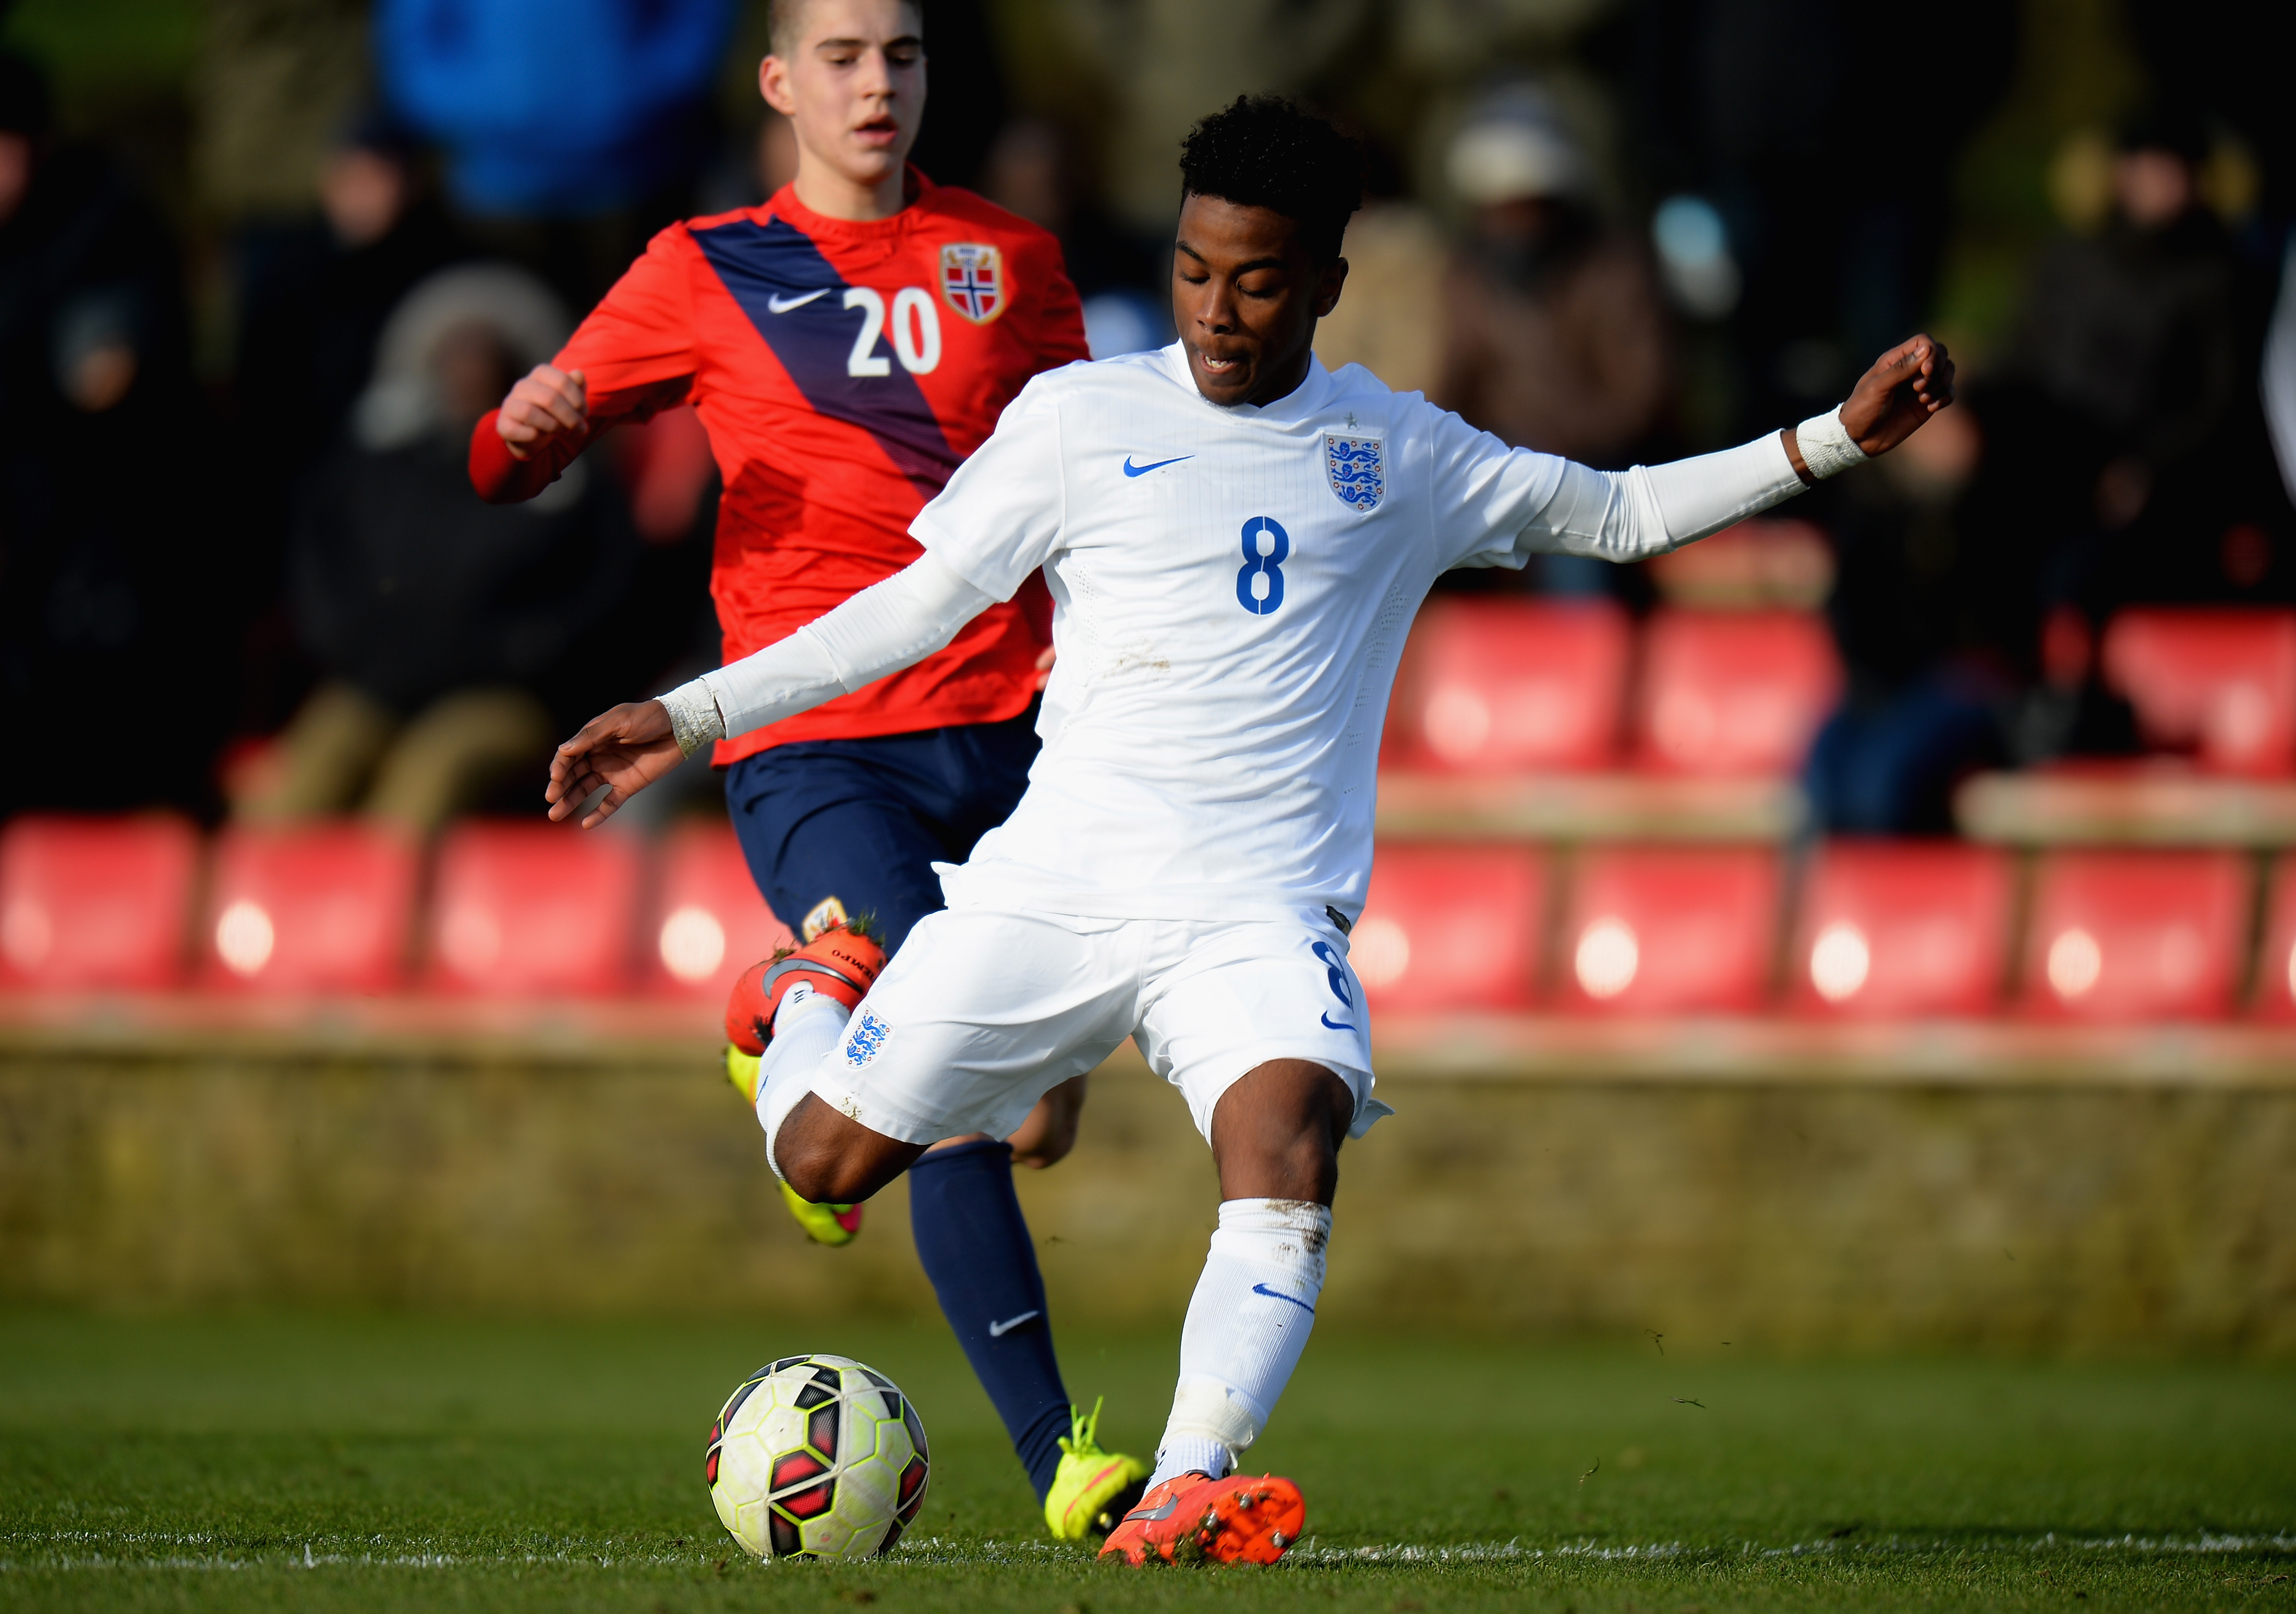 BURTON-UPON-TRENT, ENGLAND - FEBRUARY 16:  Angel Gomes of England U16 during the U16s International Friendly match between England U16 and Norway U16 at St Georges Park on February 16, 2016 in Burton-upon-Trent, England.  (Photo by Tony Marshall/Getty Images)